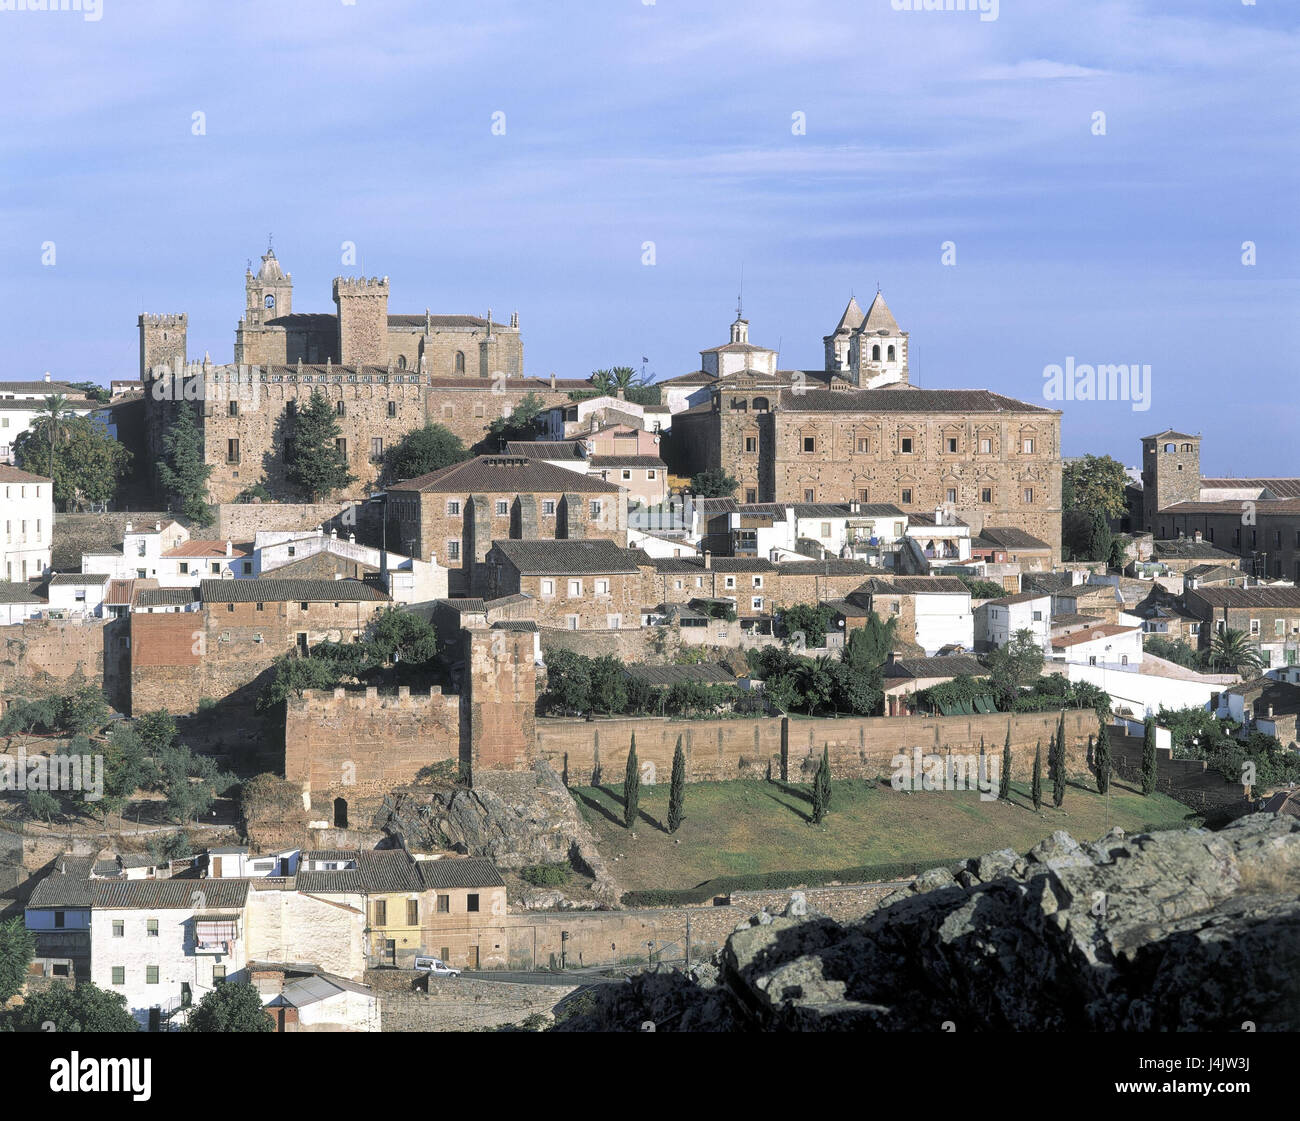 Spain, Caceres, Guadalupe, town overview, cloister ex-diaeresis dura, town view, view, cloister of Nuestra Senora de Guadalupe, city wall, detail, UNESCO-world cultural heritage, structure, architecture, historically Stock Photo